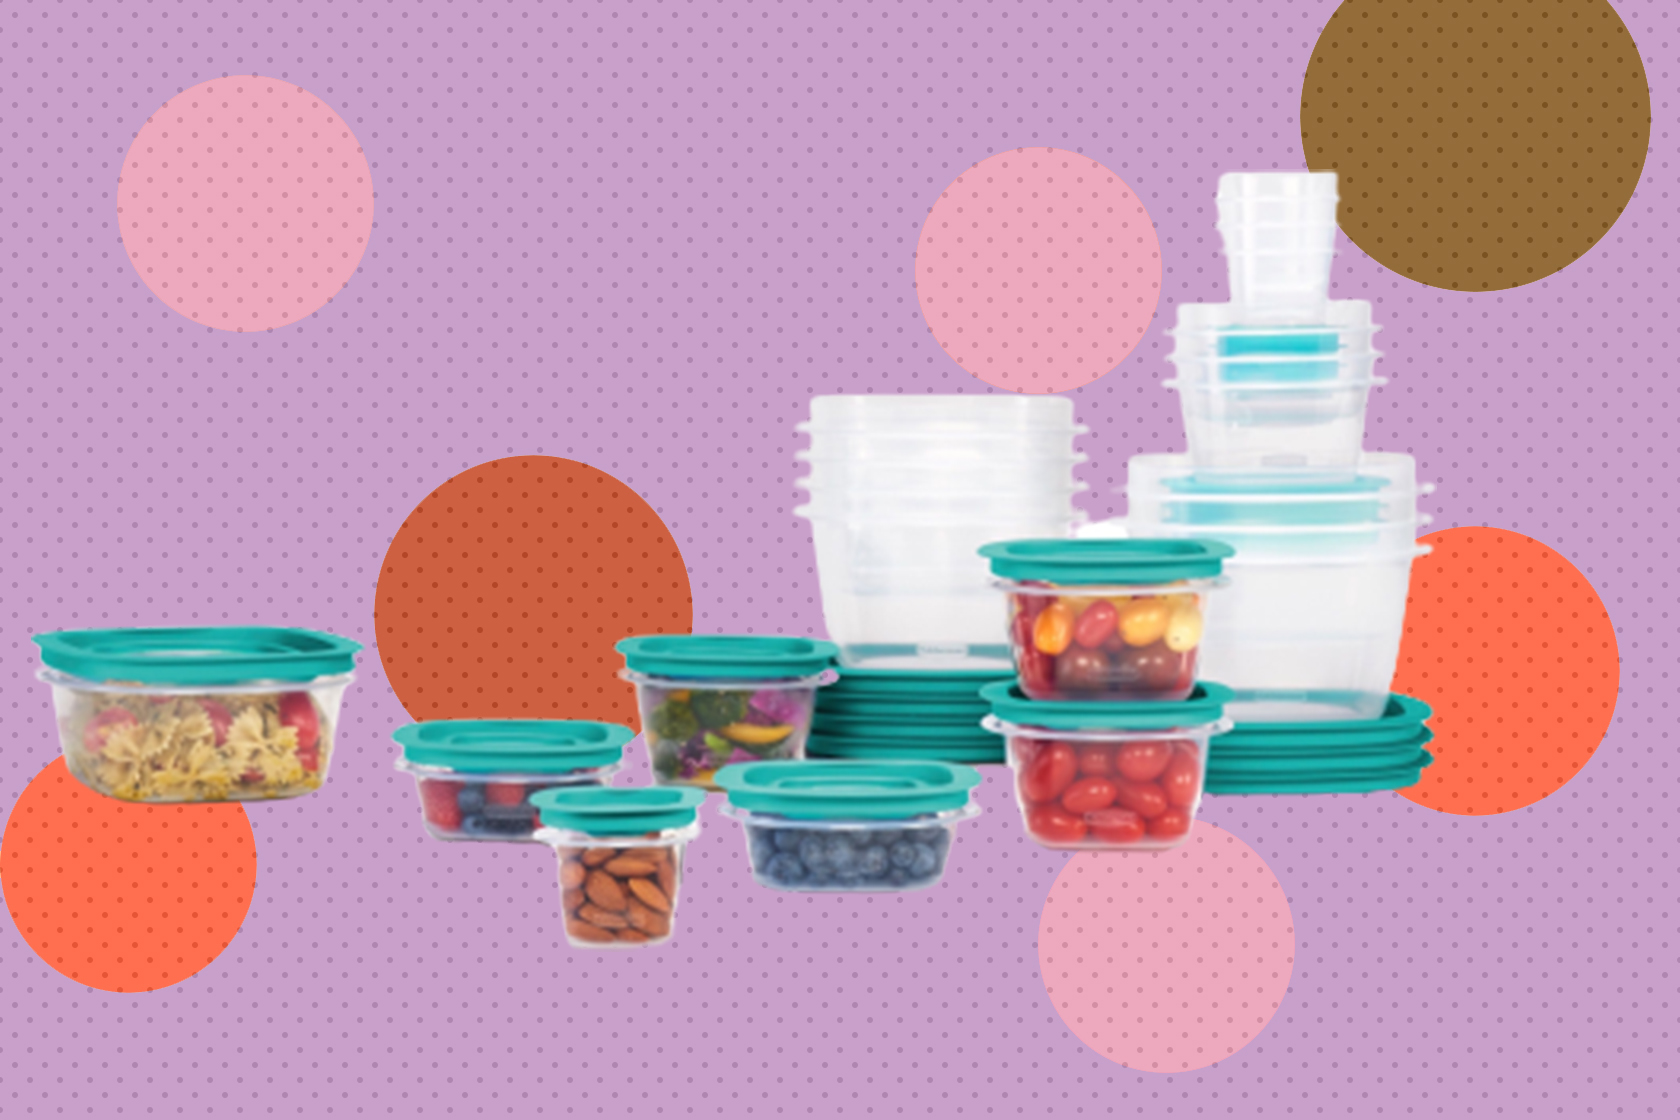 Properly store your food with this 42-piece Rubbermaid set for $25